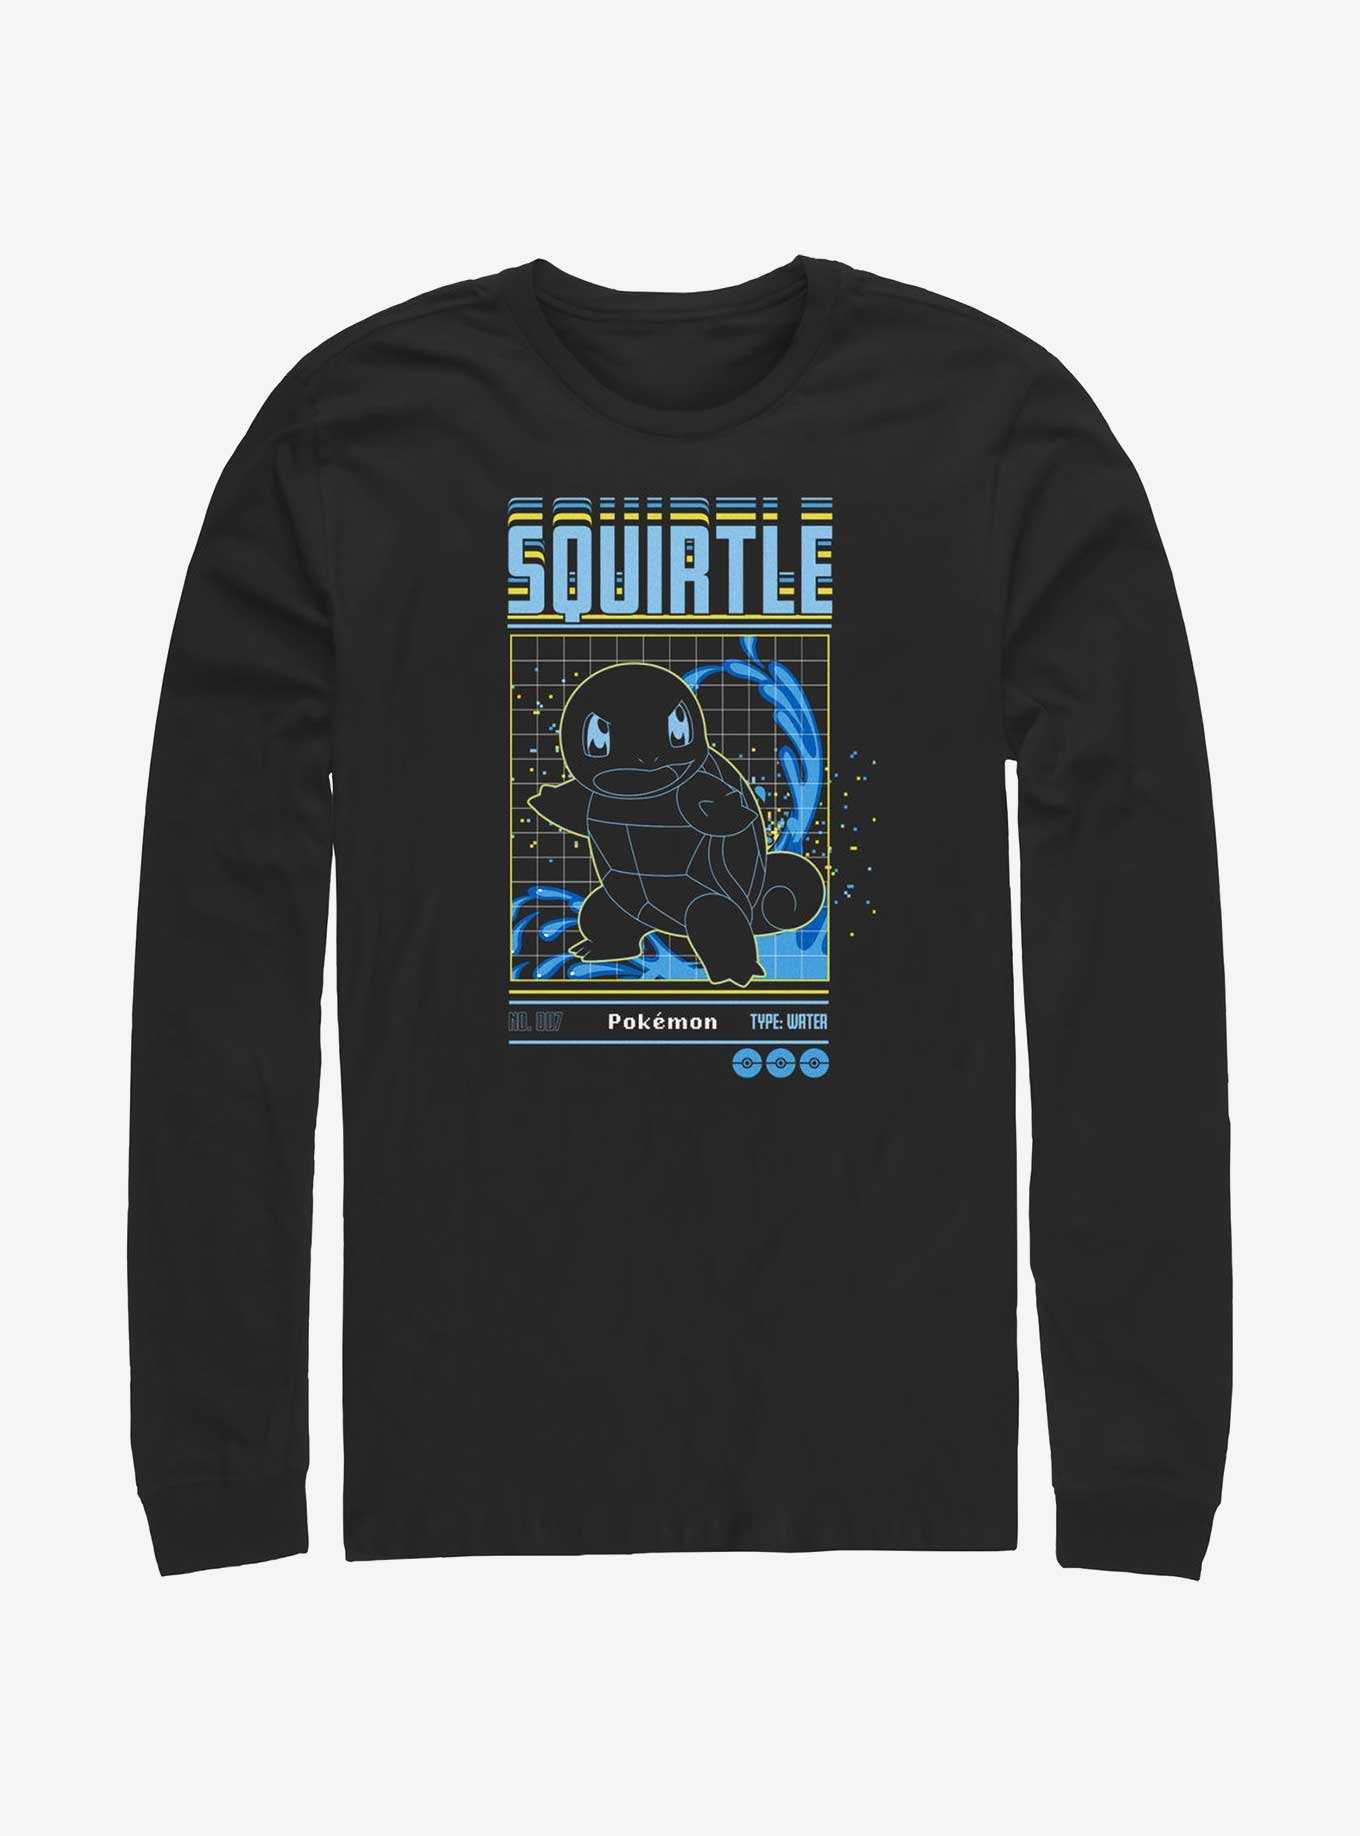 Pokemon Squirtle Grid Long-Sleeve T-Shirt, , hi-res